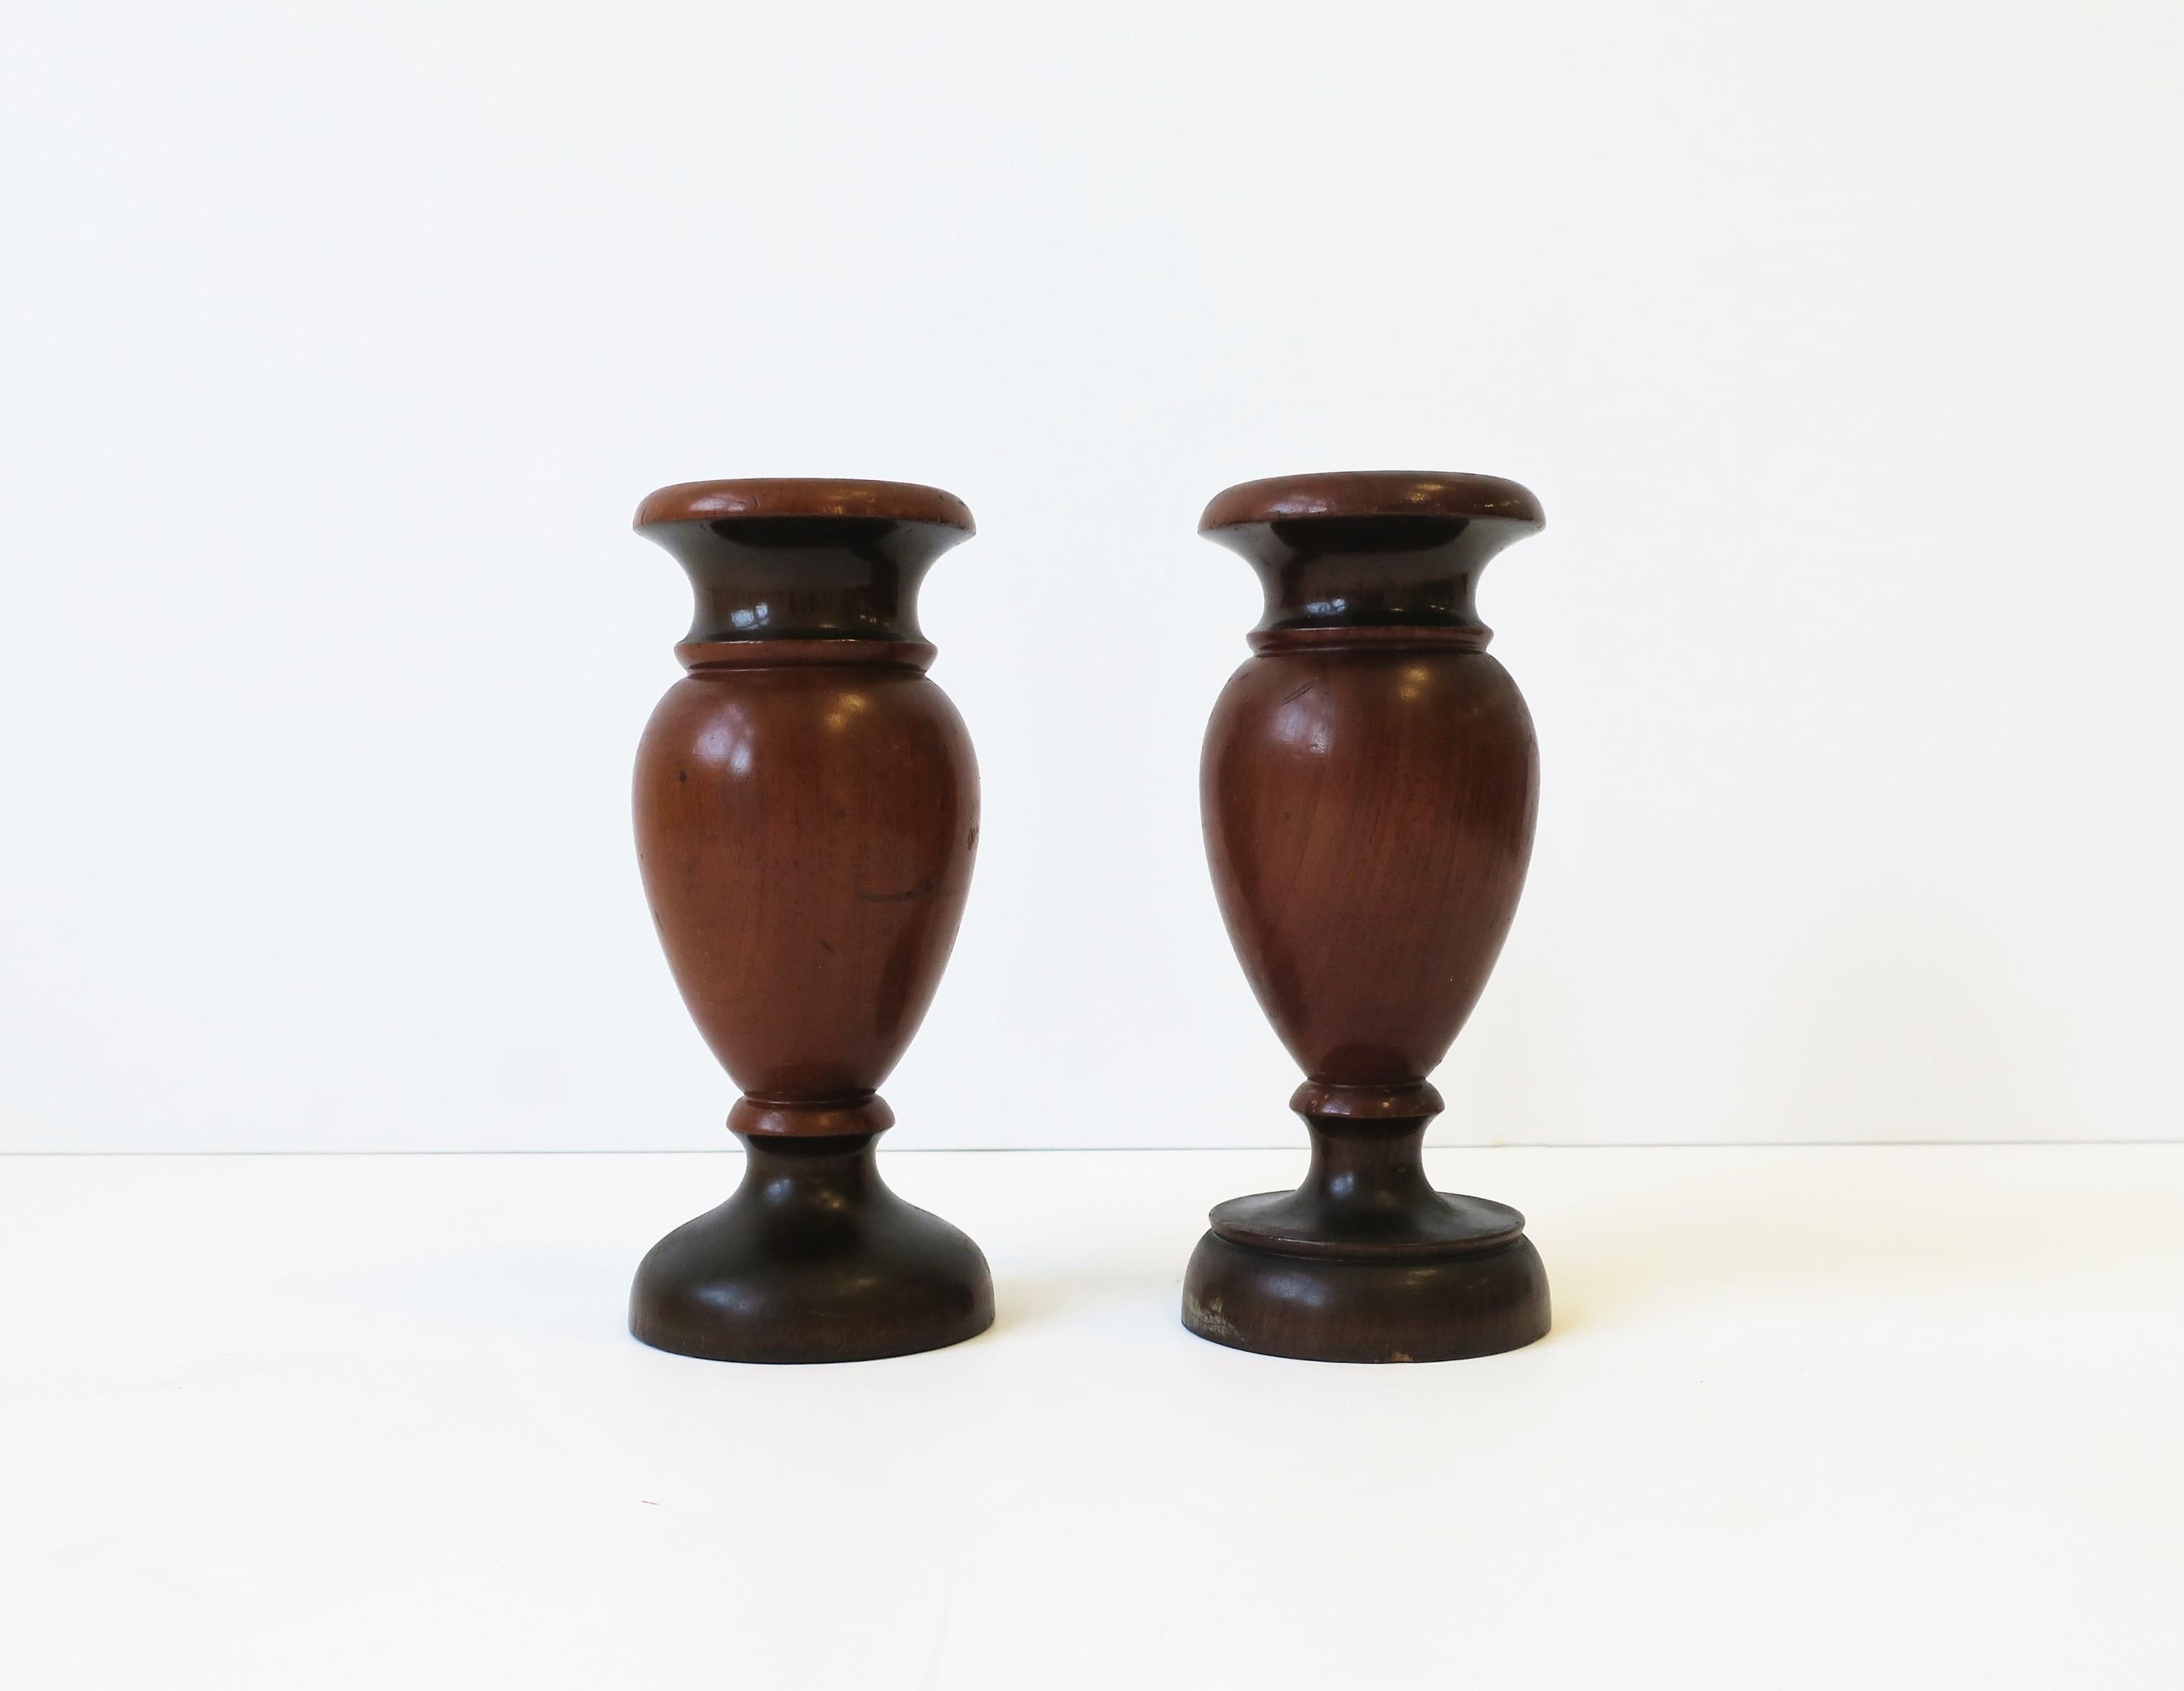 English Turned Walnut Urn Wood Spill Vases, Pair, circa 19th Century For Sale 3